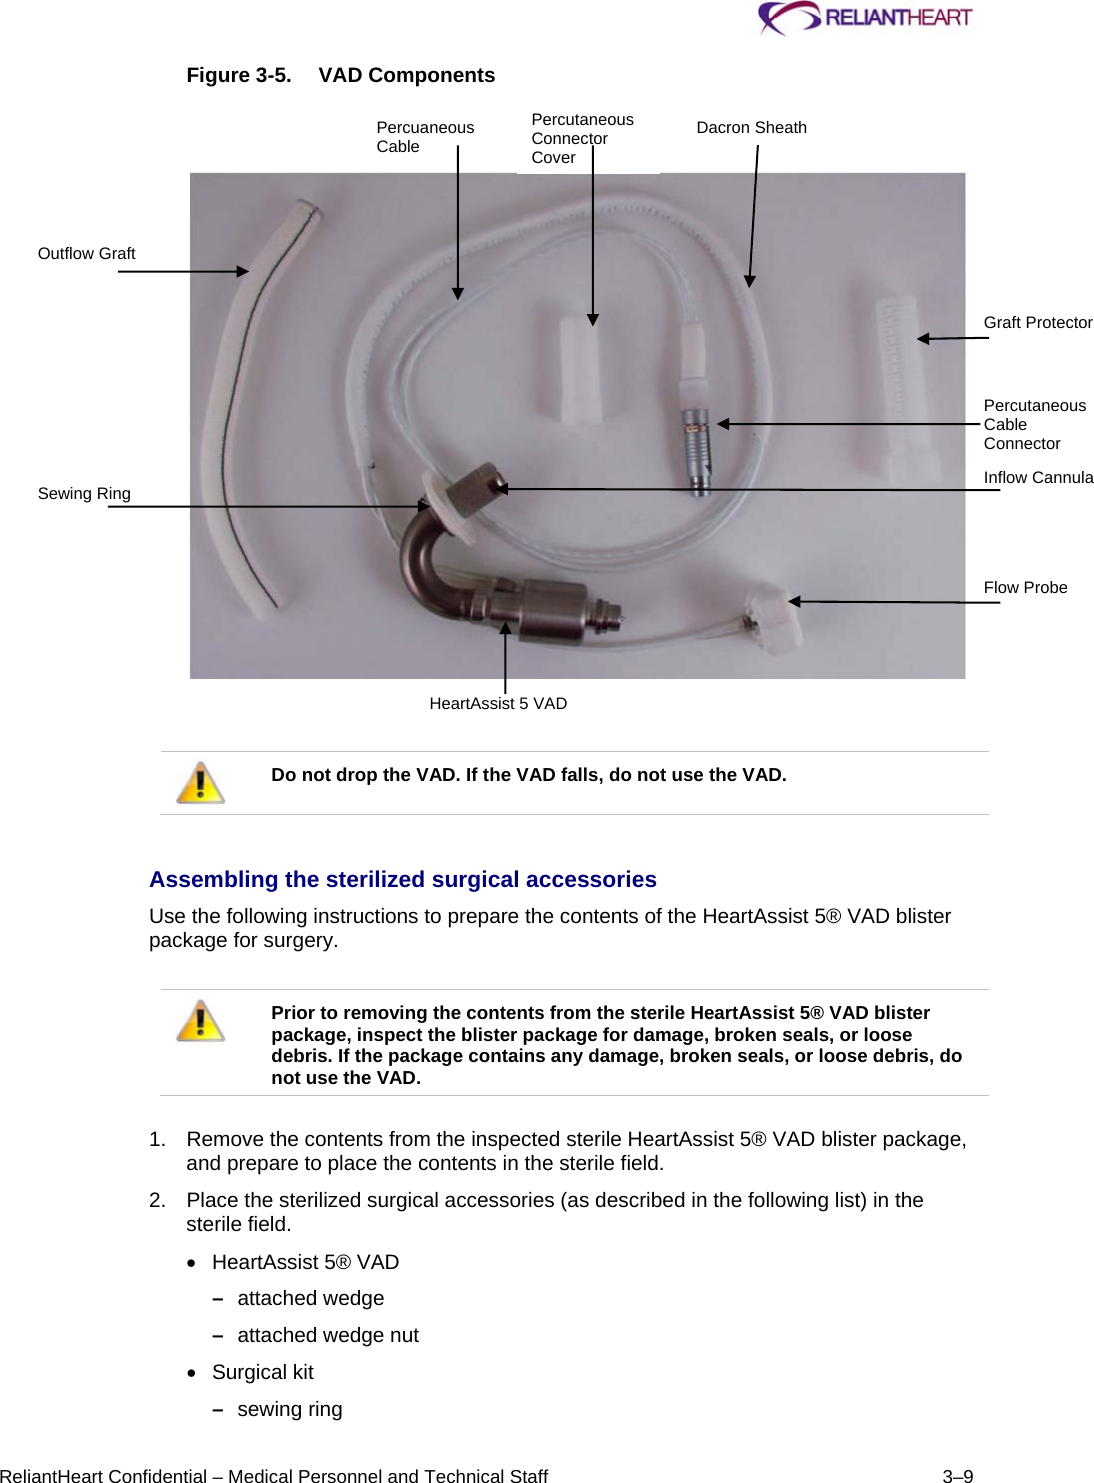     ReliantHeart Confidential – Medical Personnel and Technical Staff  3–9 Figure 3-5.  VAD Components       Do not drop the VAD. If the VAD falls, do not use the VAD.   Assembling the sterilized surgical accessories  Use the following instructions to prepare the contents of the HeartAssist 5® VAD blister package for surgery.    Prior to removing the contents from the sterile HeartAssist 5® VAD blister package, inspect the blister package for damage, broken seals, or loose debris. If the package contains any damage, broken seals, or loose debris, do not use the VAD.   1.  Remove the contents from the inspected sterile HeartAssist 5® VAD blister package, and prepare to place the contents in the sterile field.  2.  Place the sterilized surgical accessories (as described in the following list) in the sterile field.    HeartAssist 5® VAD –  attached wedge  –  attached wedge nut   Surgical kit  –  sewing ring  Outflow Graft Sewing Ring Percuaneous Cable Percutaneous Connector Cover Dacron Sheath Graft Protector Percutaneous Cable Connector Inflow Cannula Flow Probe HeartAssist 5 VAD 